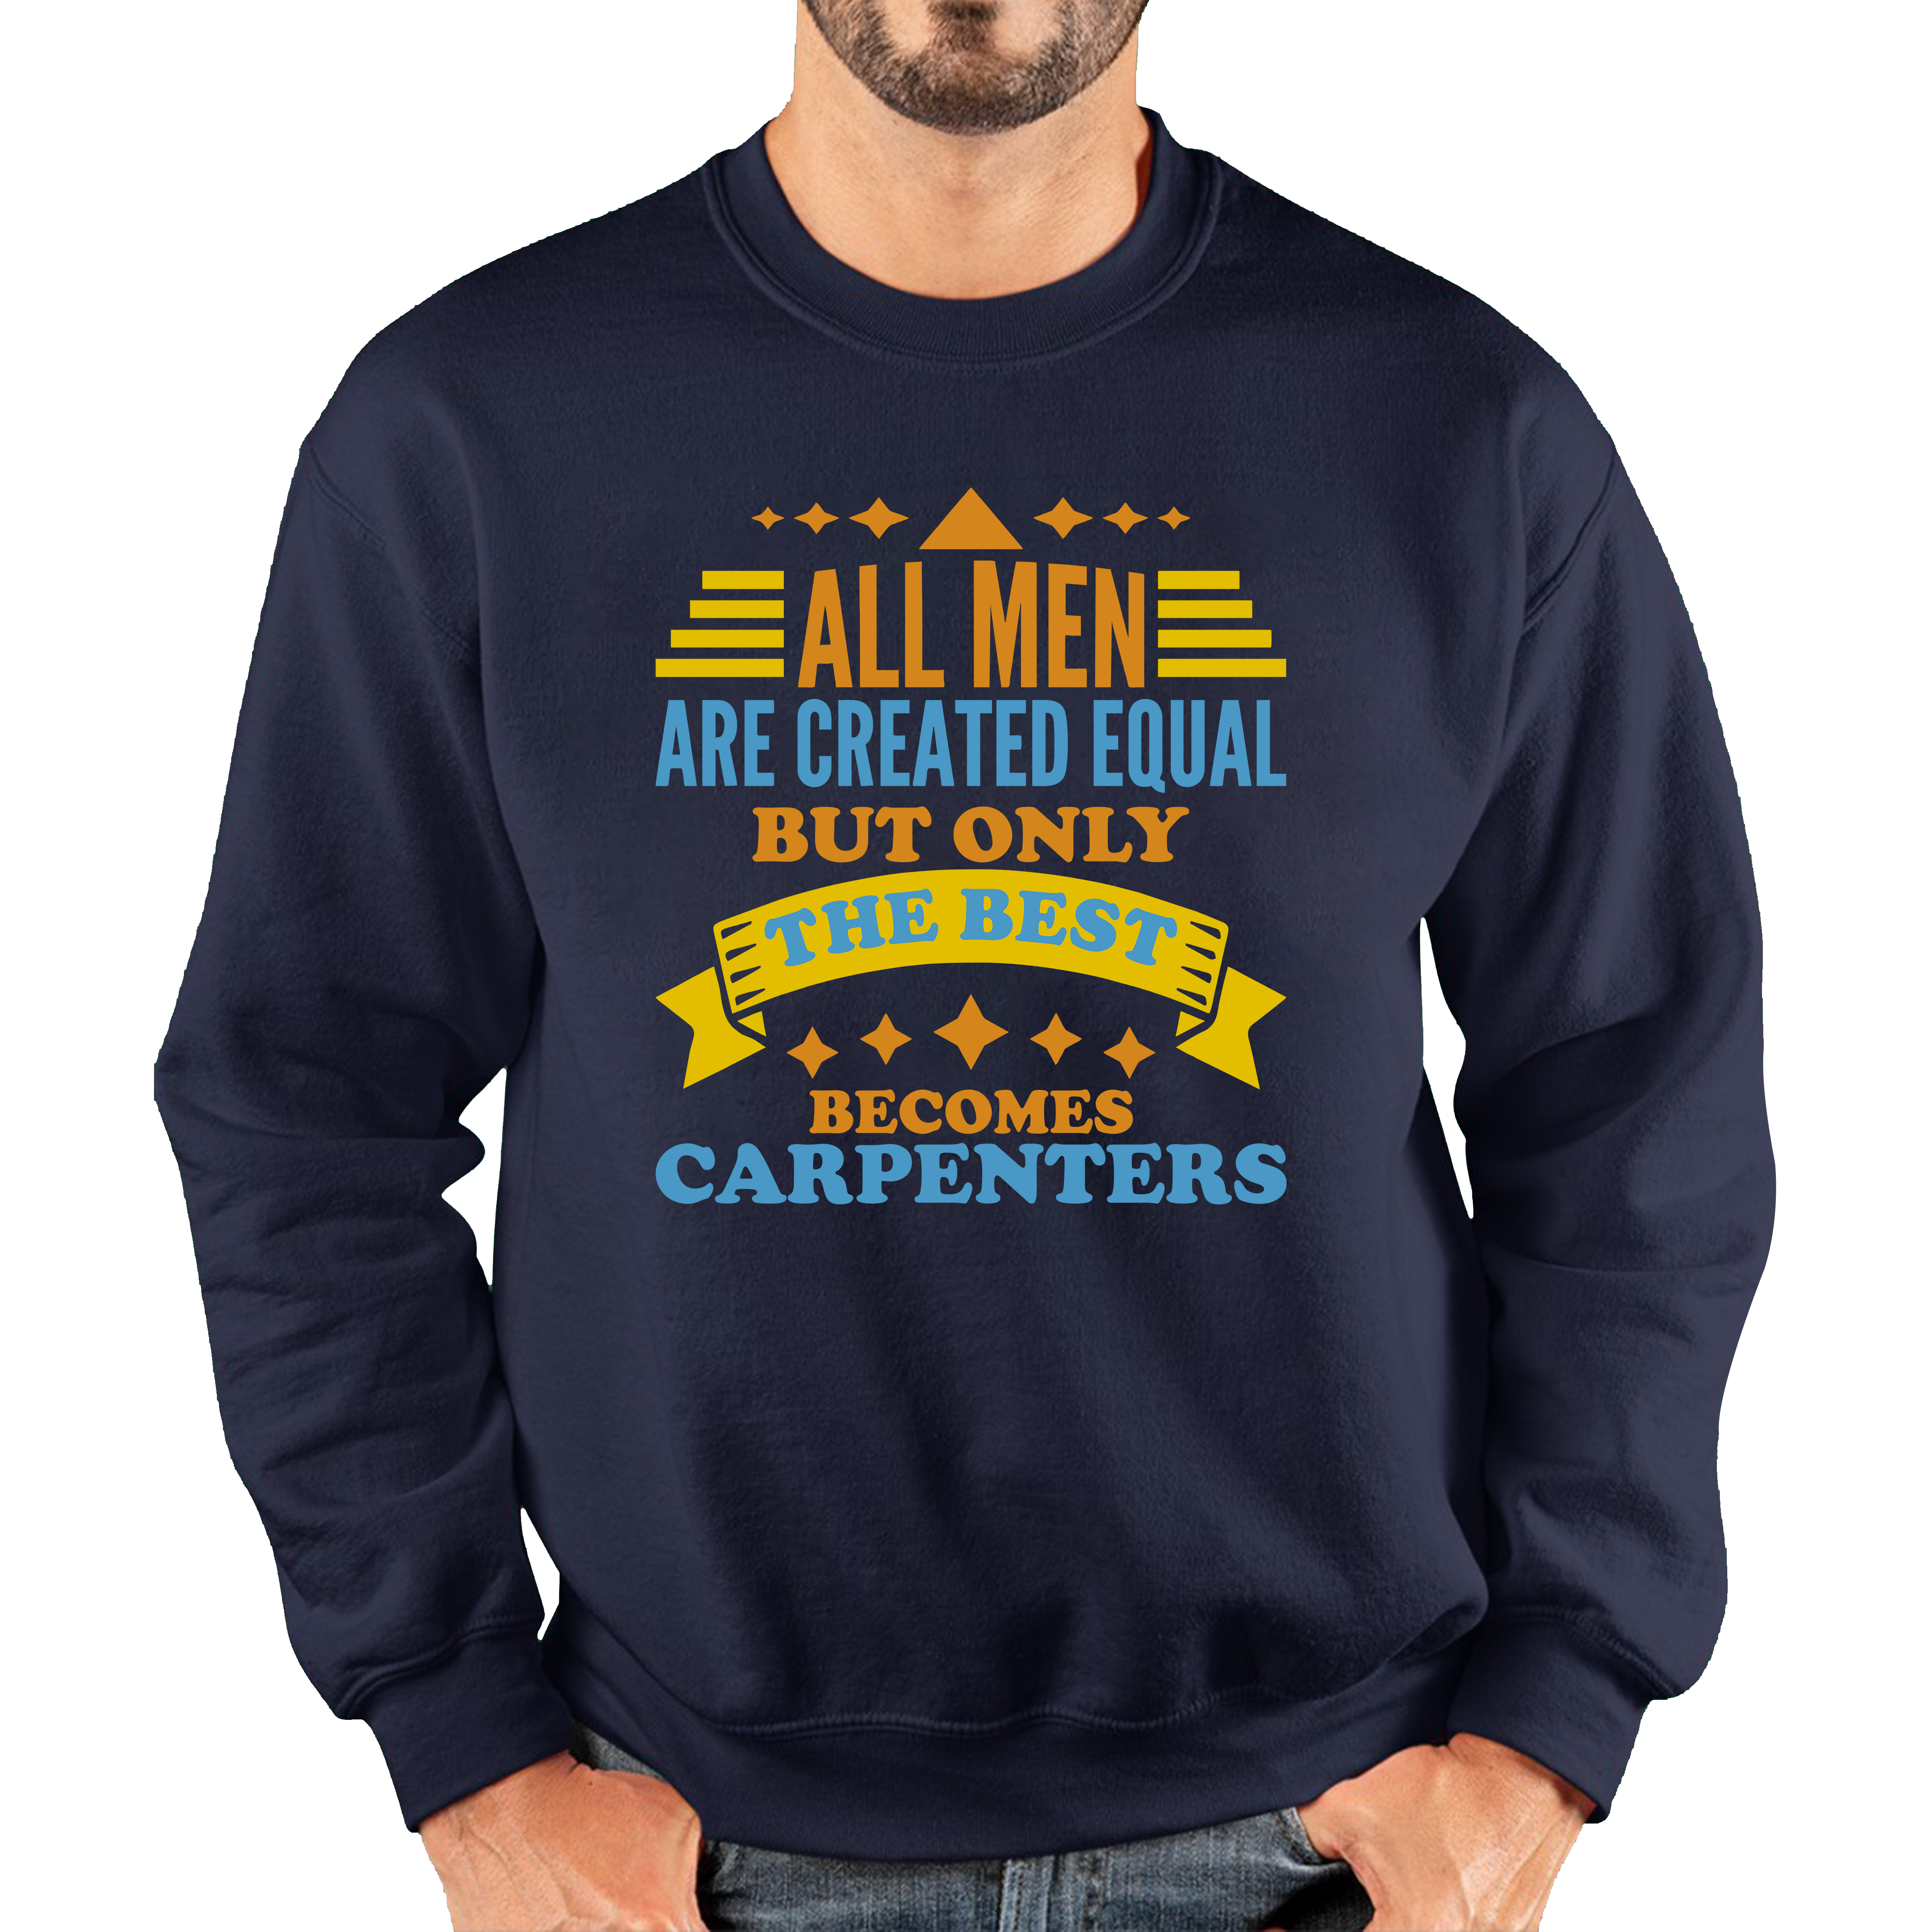 All Men Are Created Equal But Only The Best Becomes Carpenters Unisex Sweatshirt